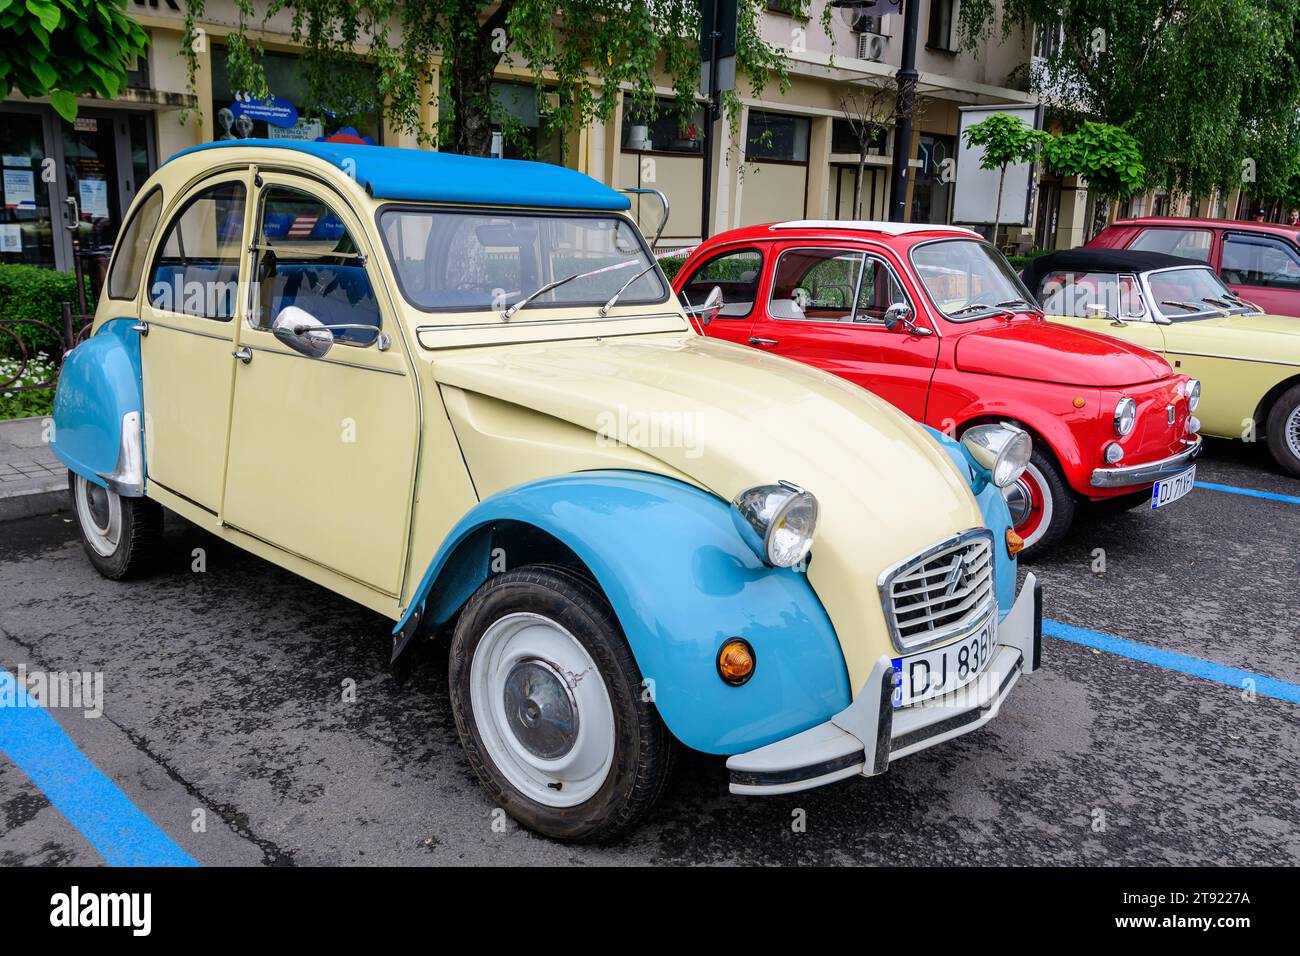 Craiova, Romania, 29 May 2022: One vivid yellow and blue Citroen French vintage car parked in a street at an event for vintage cars collections, in a Stock Photo